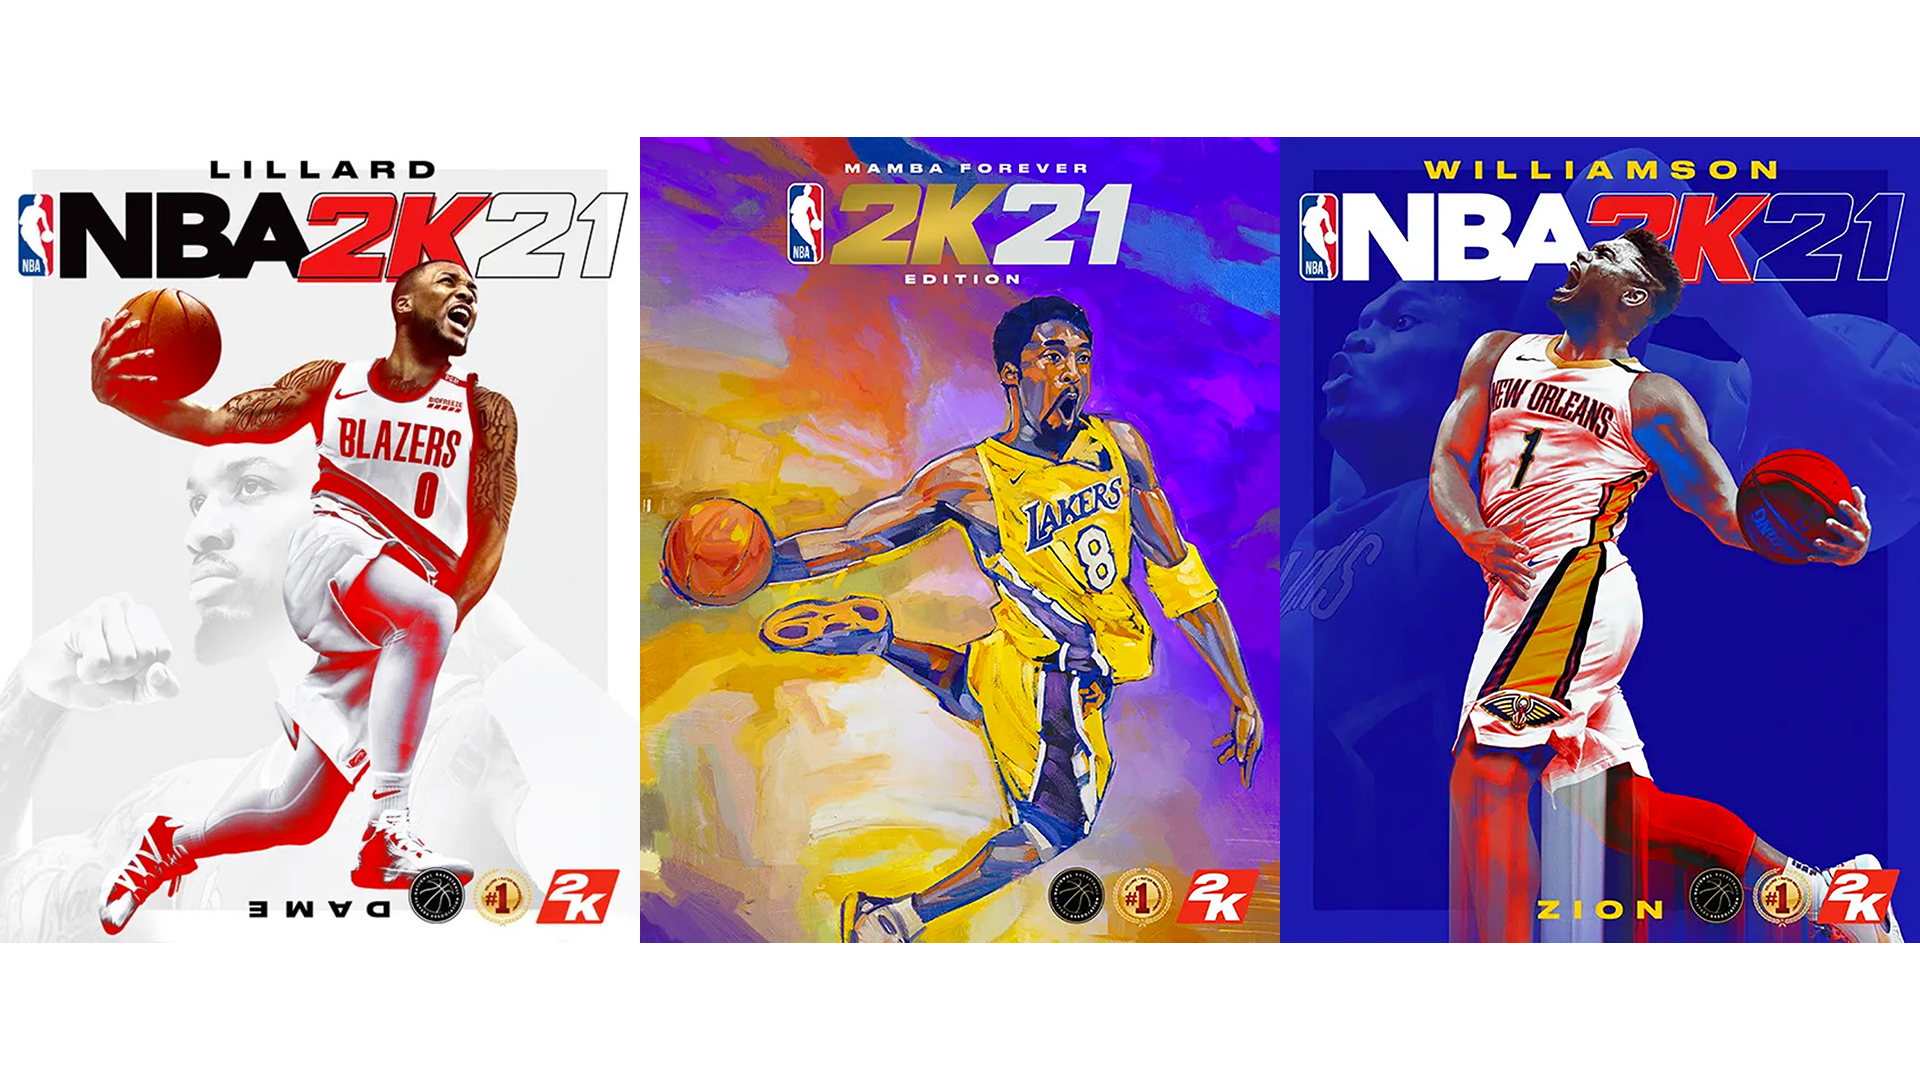 NBA 2K21 release date, cost, new features, editions: A guide to everything you need to know in 2020